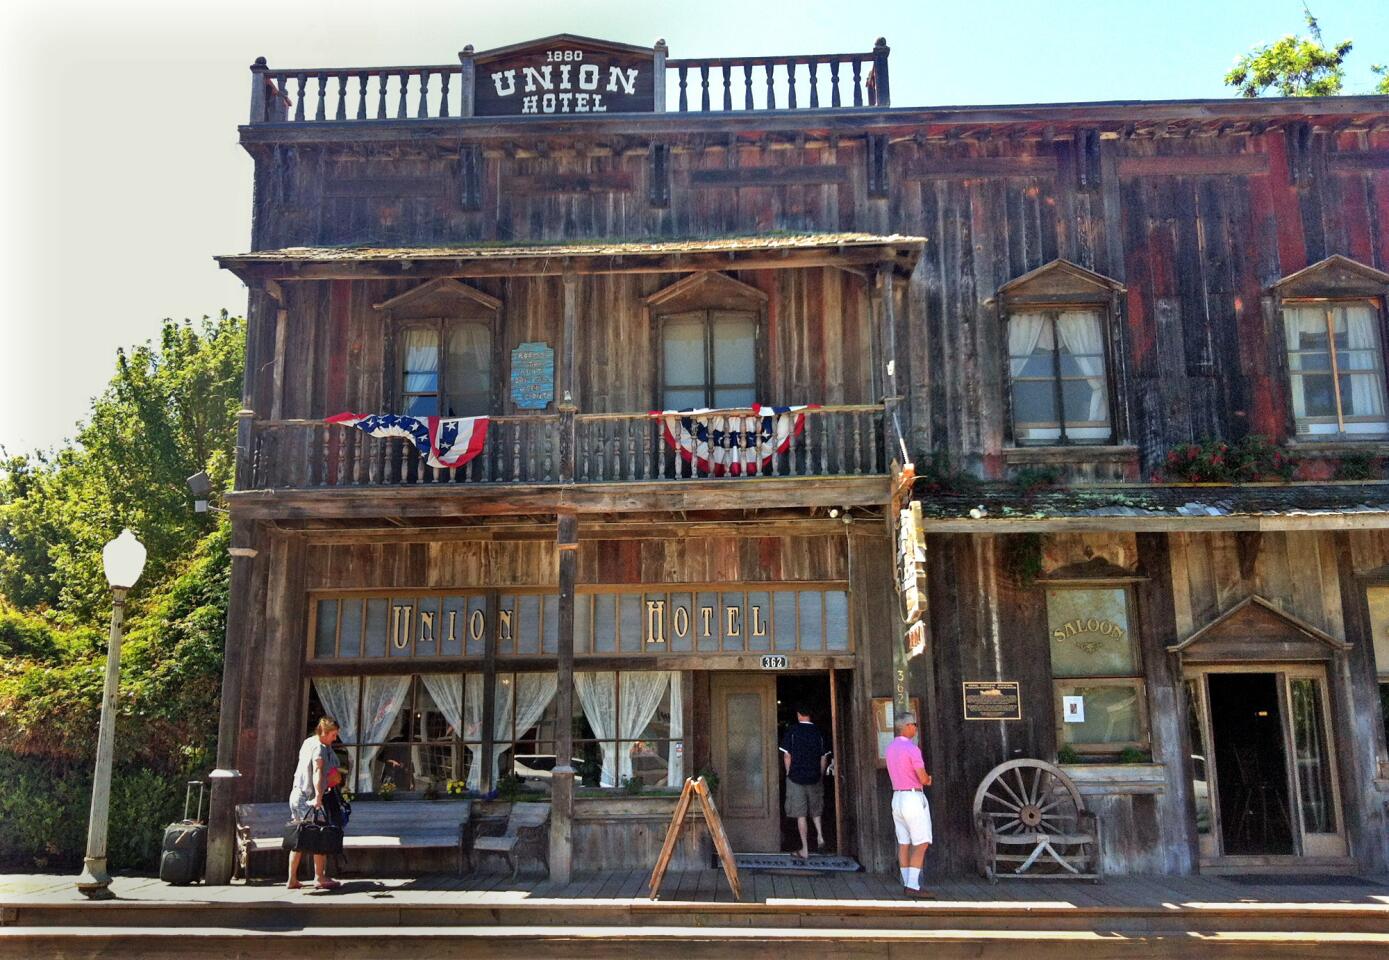 The 1880 Union Hotel in Los Alamos, Calif., was originally a stop for the stagecoach. It has 14 rooms and a saloon.